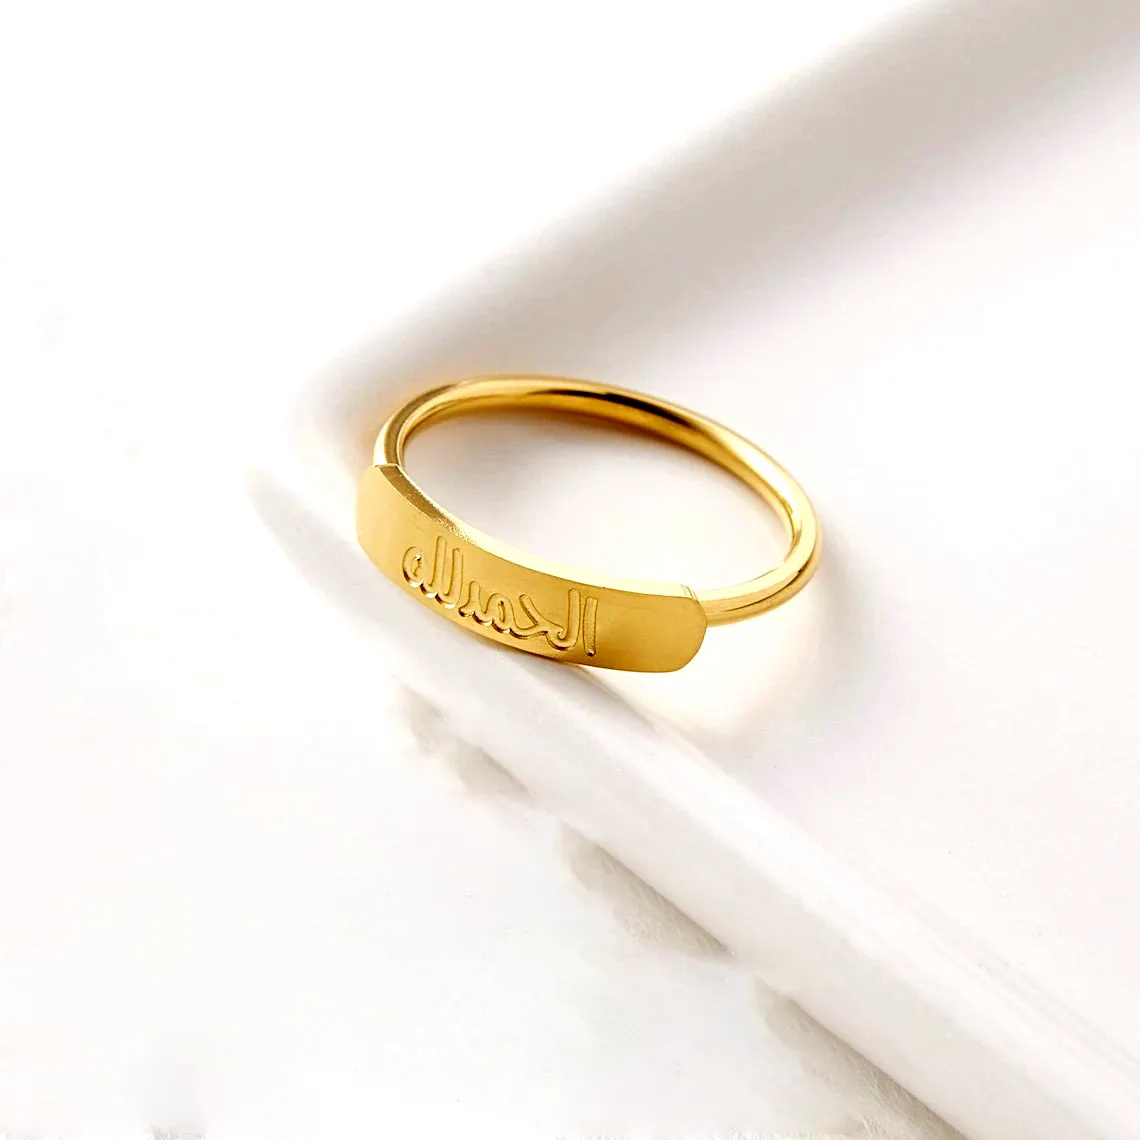 Engraved Arabic Ring For Women High Quality Handmade Stainless Steel Fashion Jewelry Ring 18K Gold Plated Letter Ring